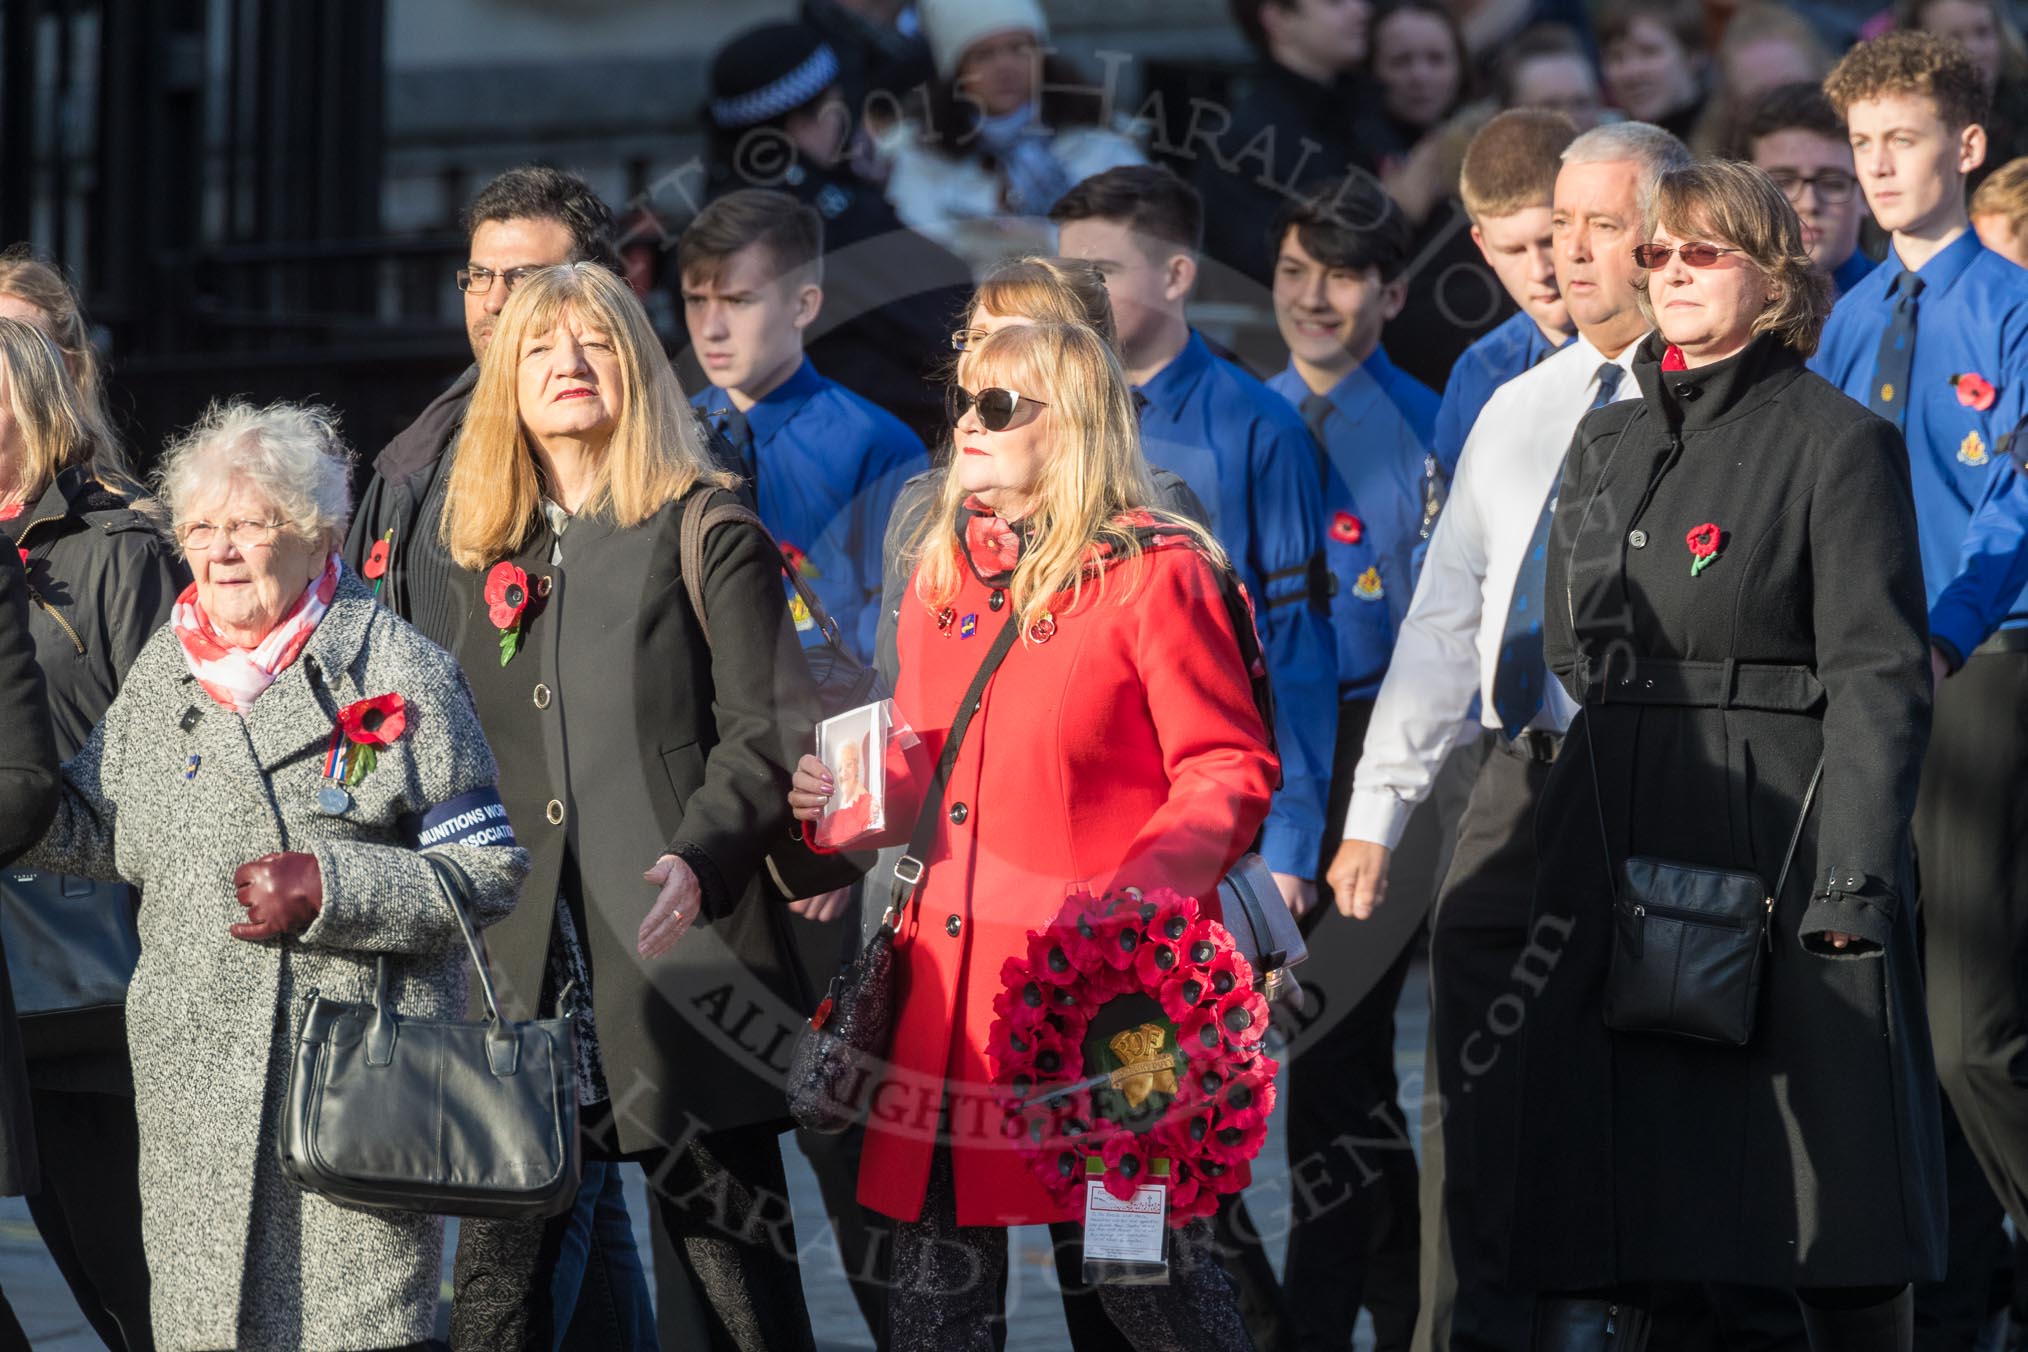 March Past, Remembrance Sunday at the Cenotaph 2016: M49 The British Evacuees Association.
Cenotaph, Whitehall, London SW1,
London,
Greater London,
United Kingdom,
on 13 November 2016 at 13:20, image #3035